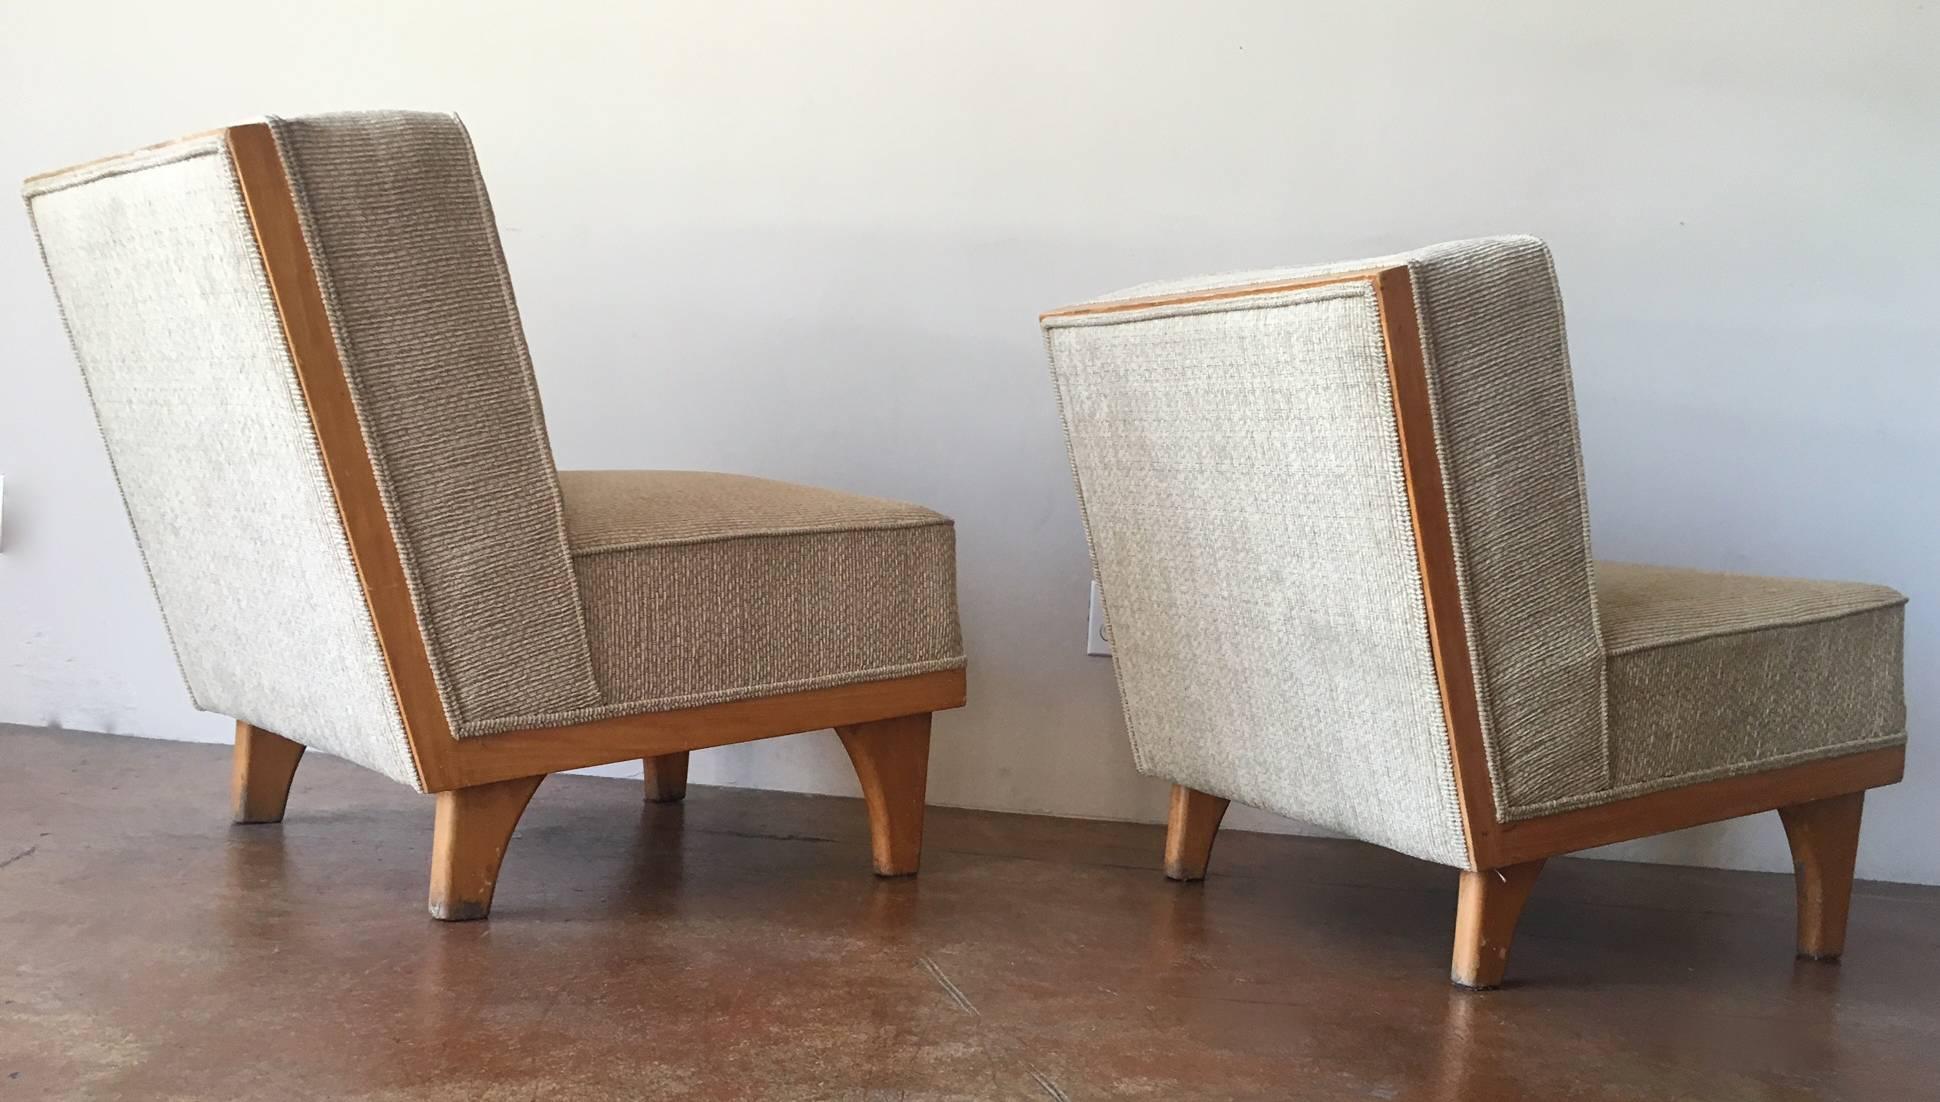 Mexican Very Rare Michael Van Beuren Lounge Chairs for Domus, Mexico, 1950s